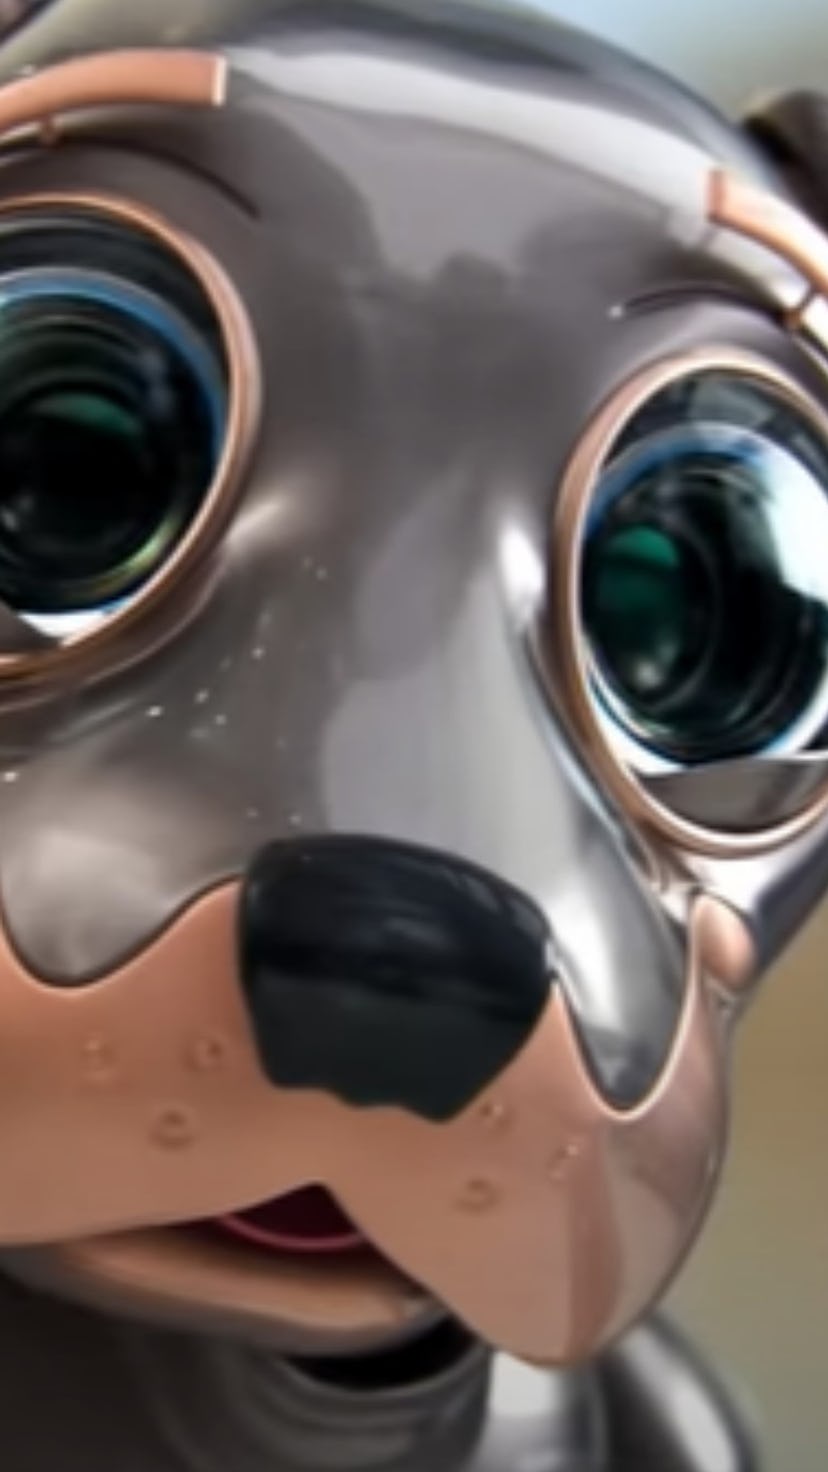 Kia’s robot dog commercial at the 2022 Super Bowl had Twitter in tears.